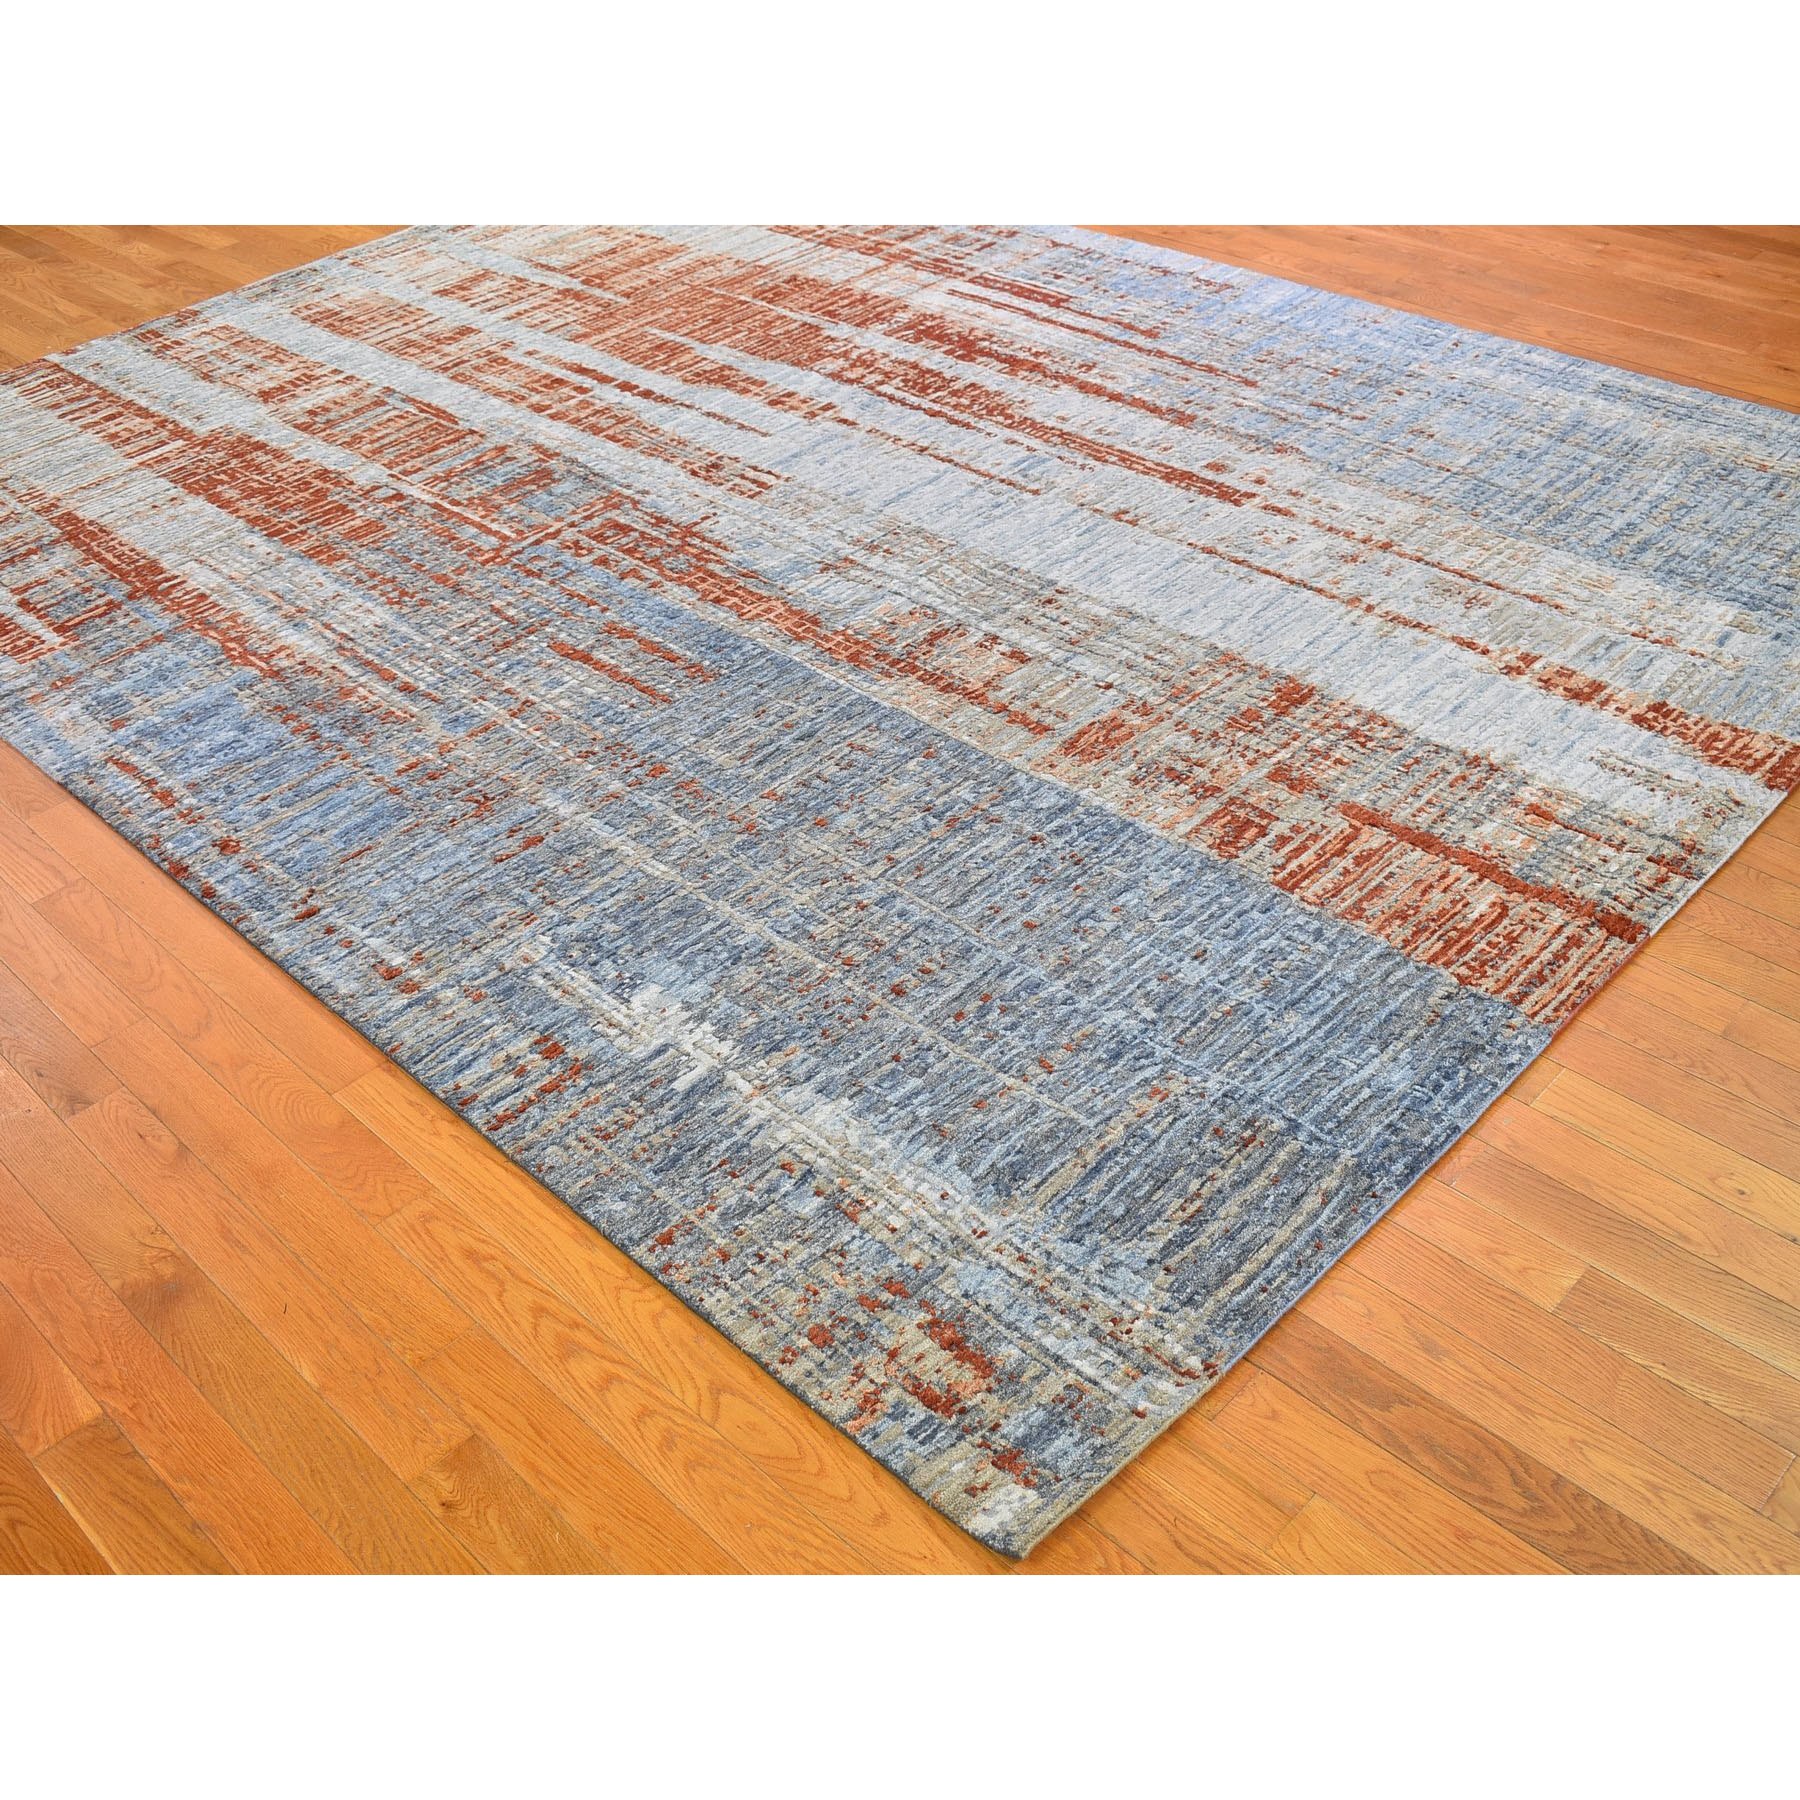 9'x12'2" Red Hi-Low Pile Abstract Design Denser Weave Wool and Silk Hand Woven Oriental Rug 